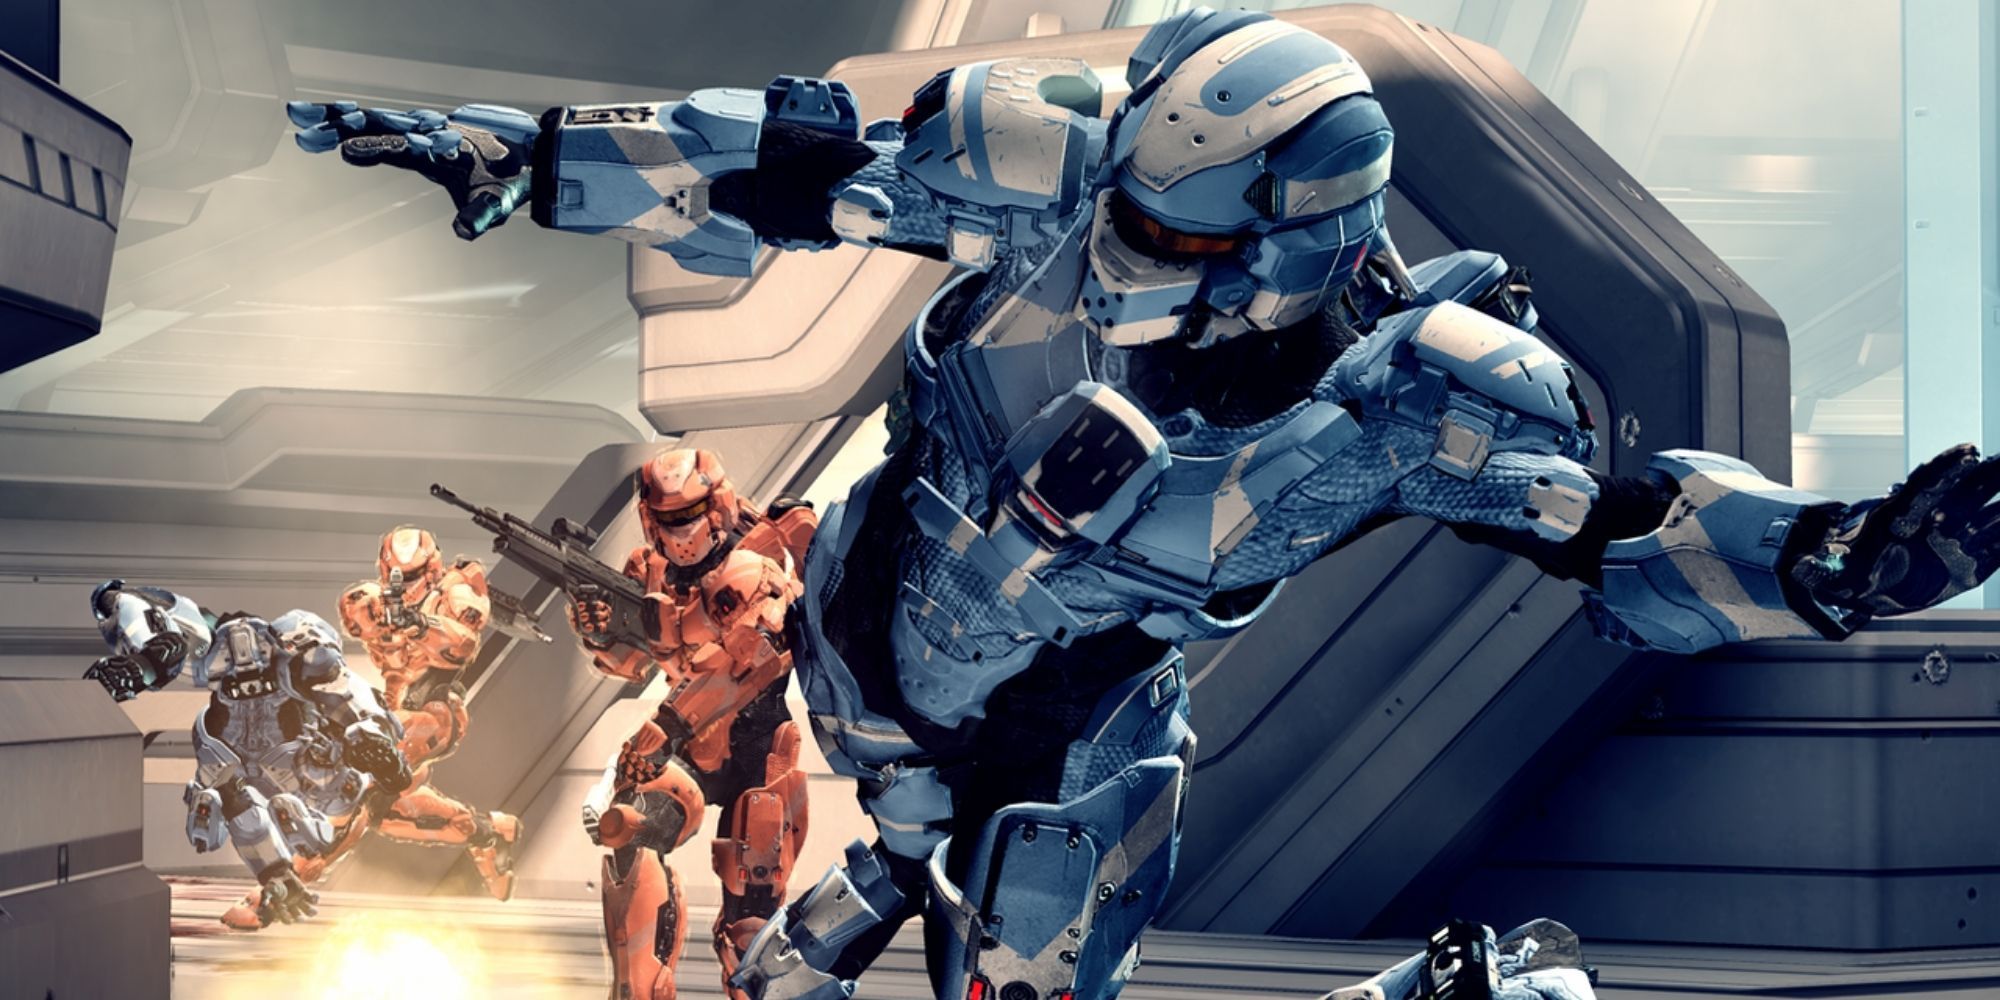 Halo Reach Multiplayer, Promo shot of 4 players playing multiplayer